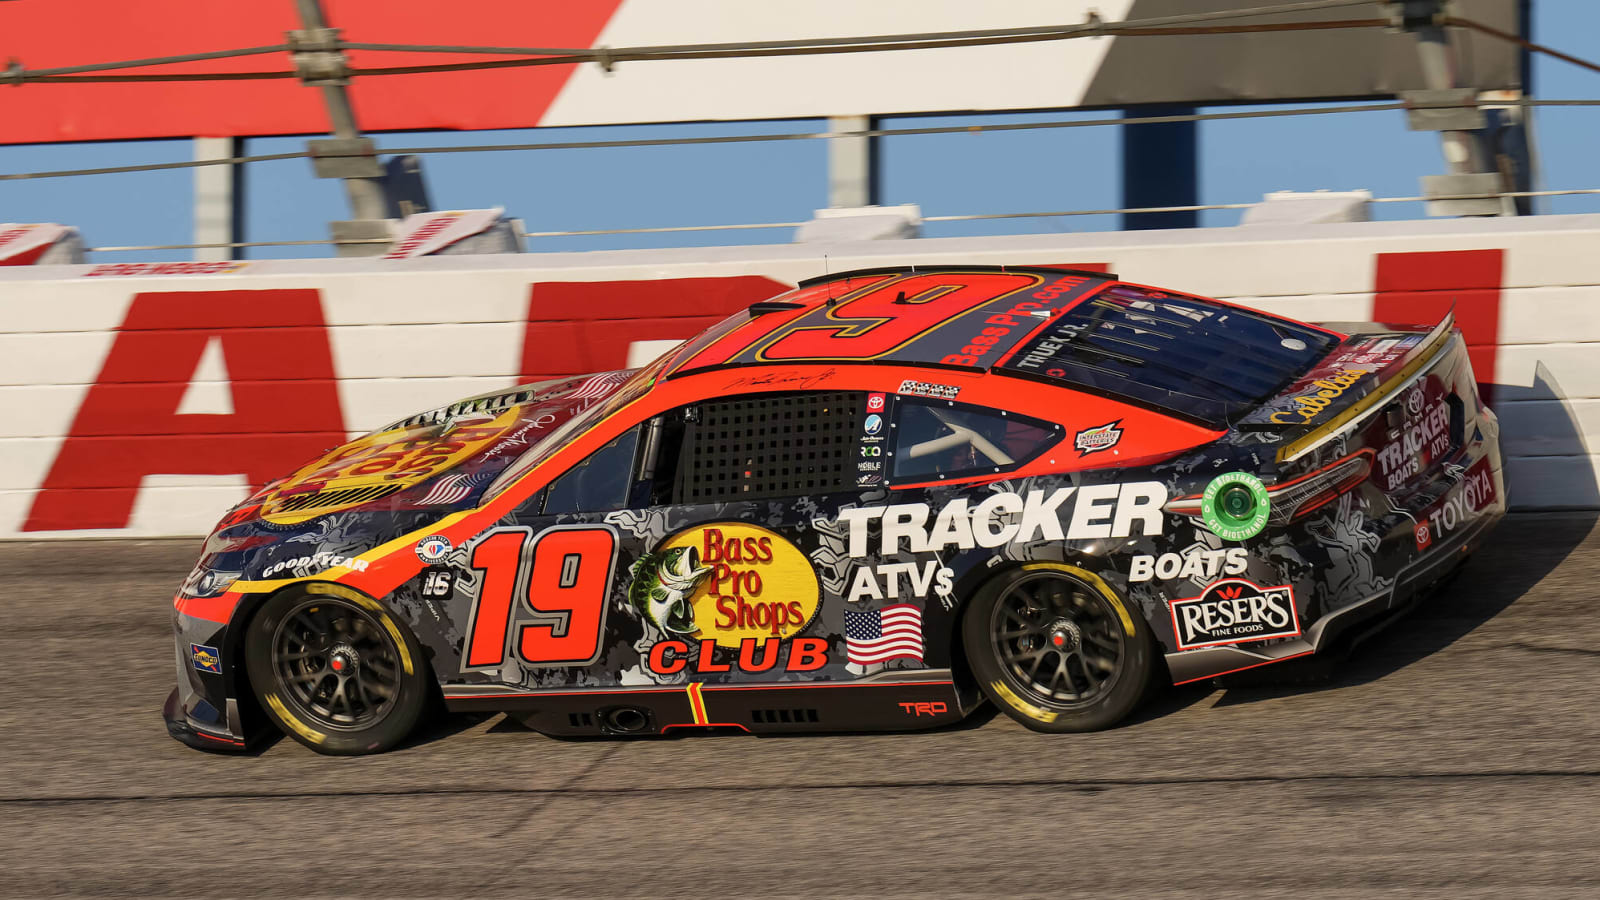 Truex’s crew chief shares photo of what ended their race